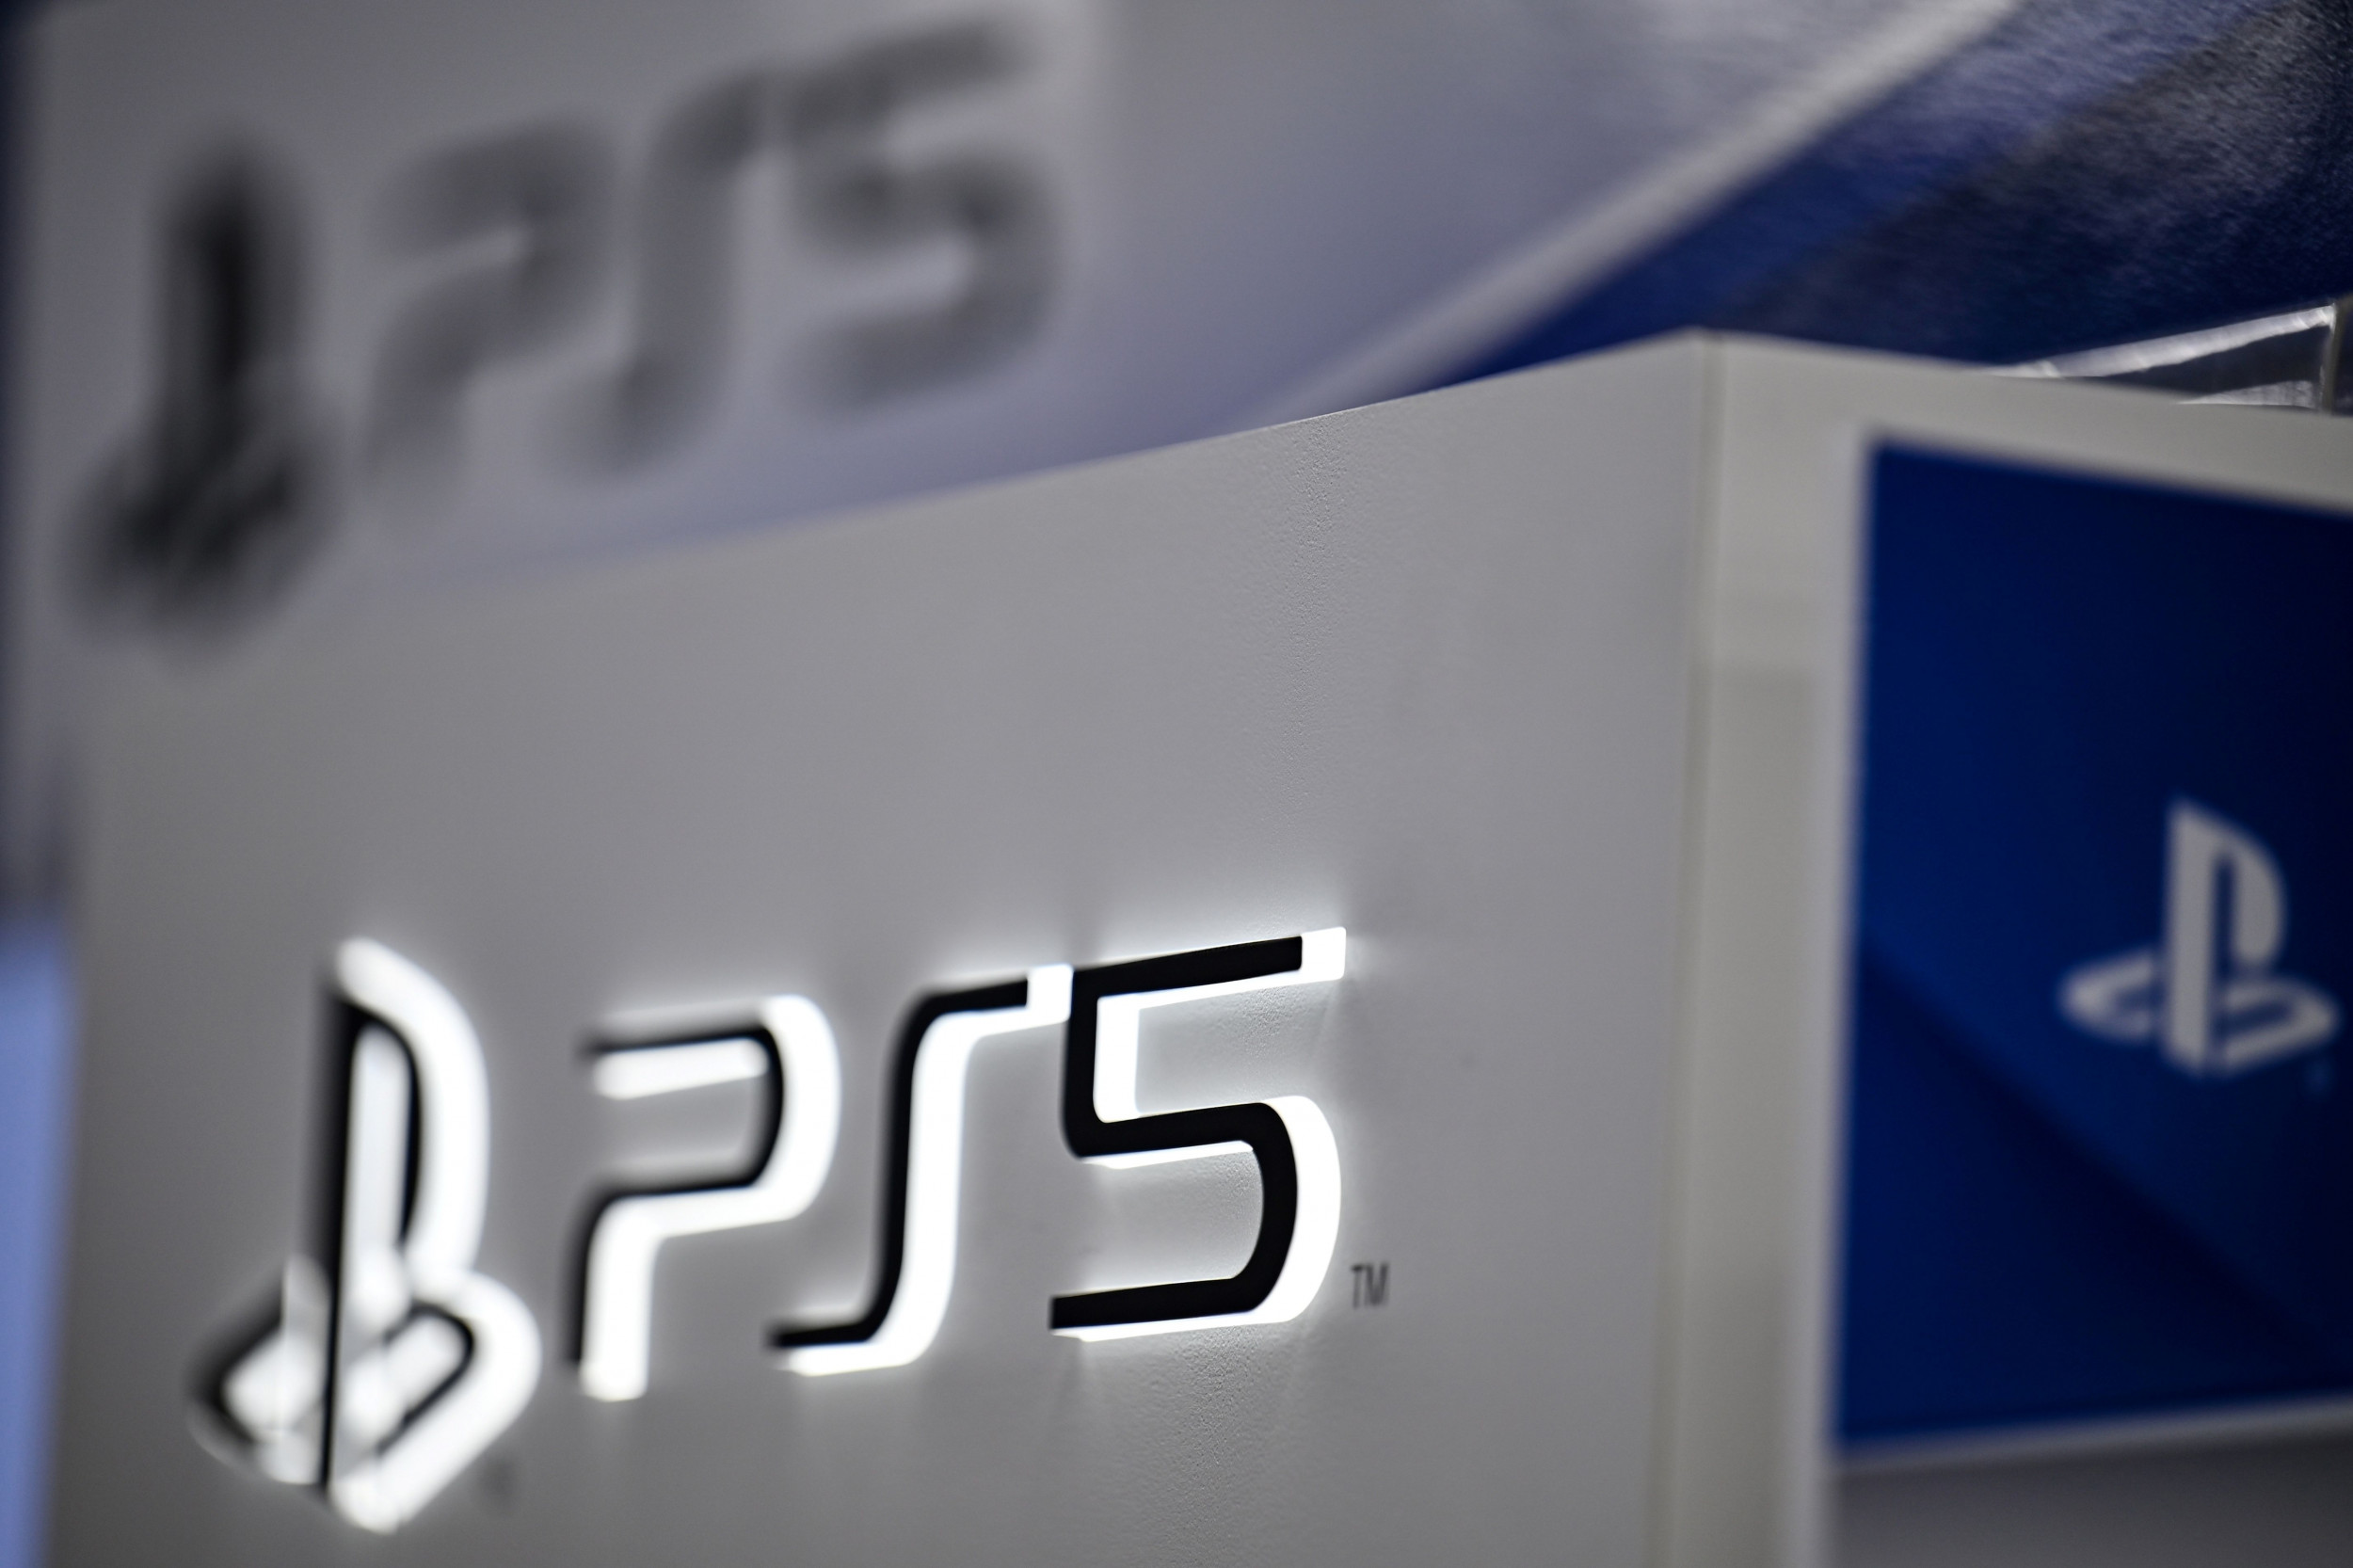 PS5 updates for PlayStation Direct, GameStop, Target, Newegg and more